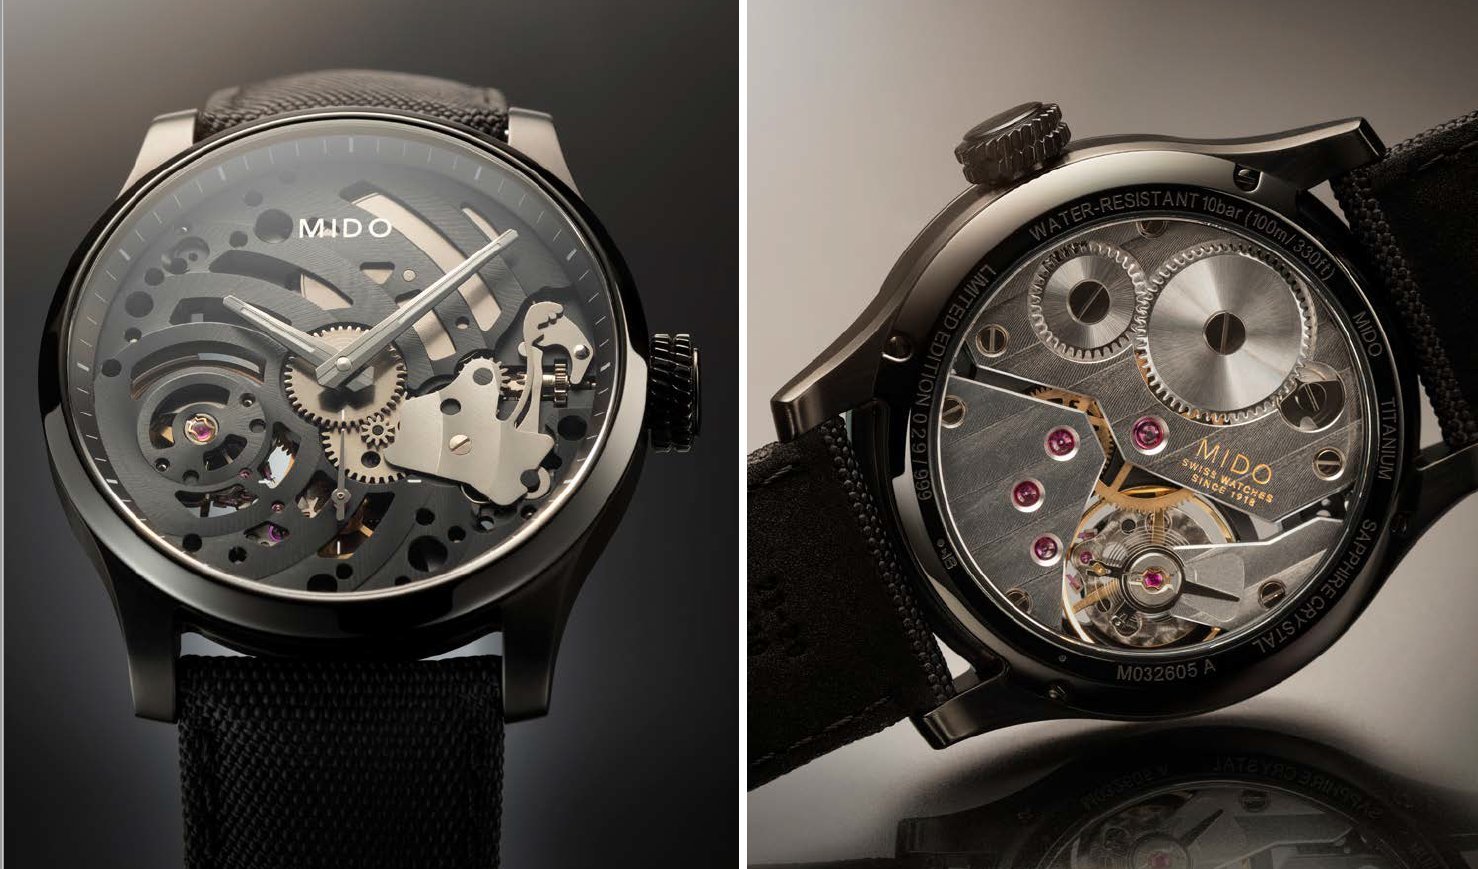 “Collectors won't be enough for Swiss watchmaking”